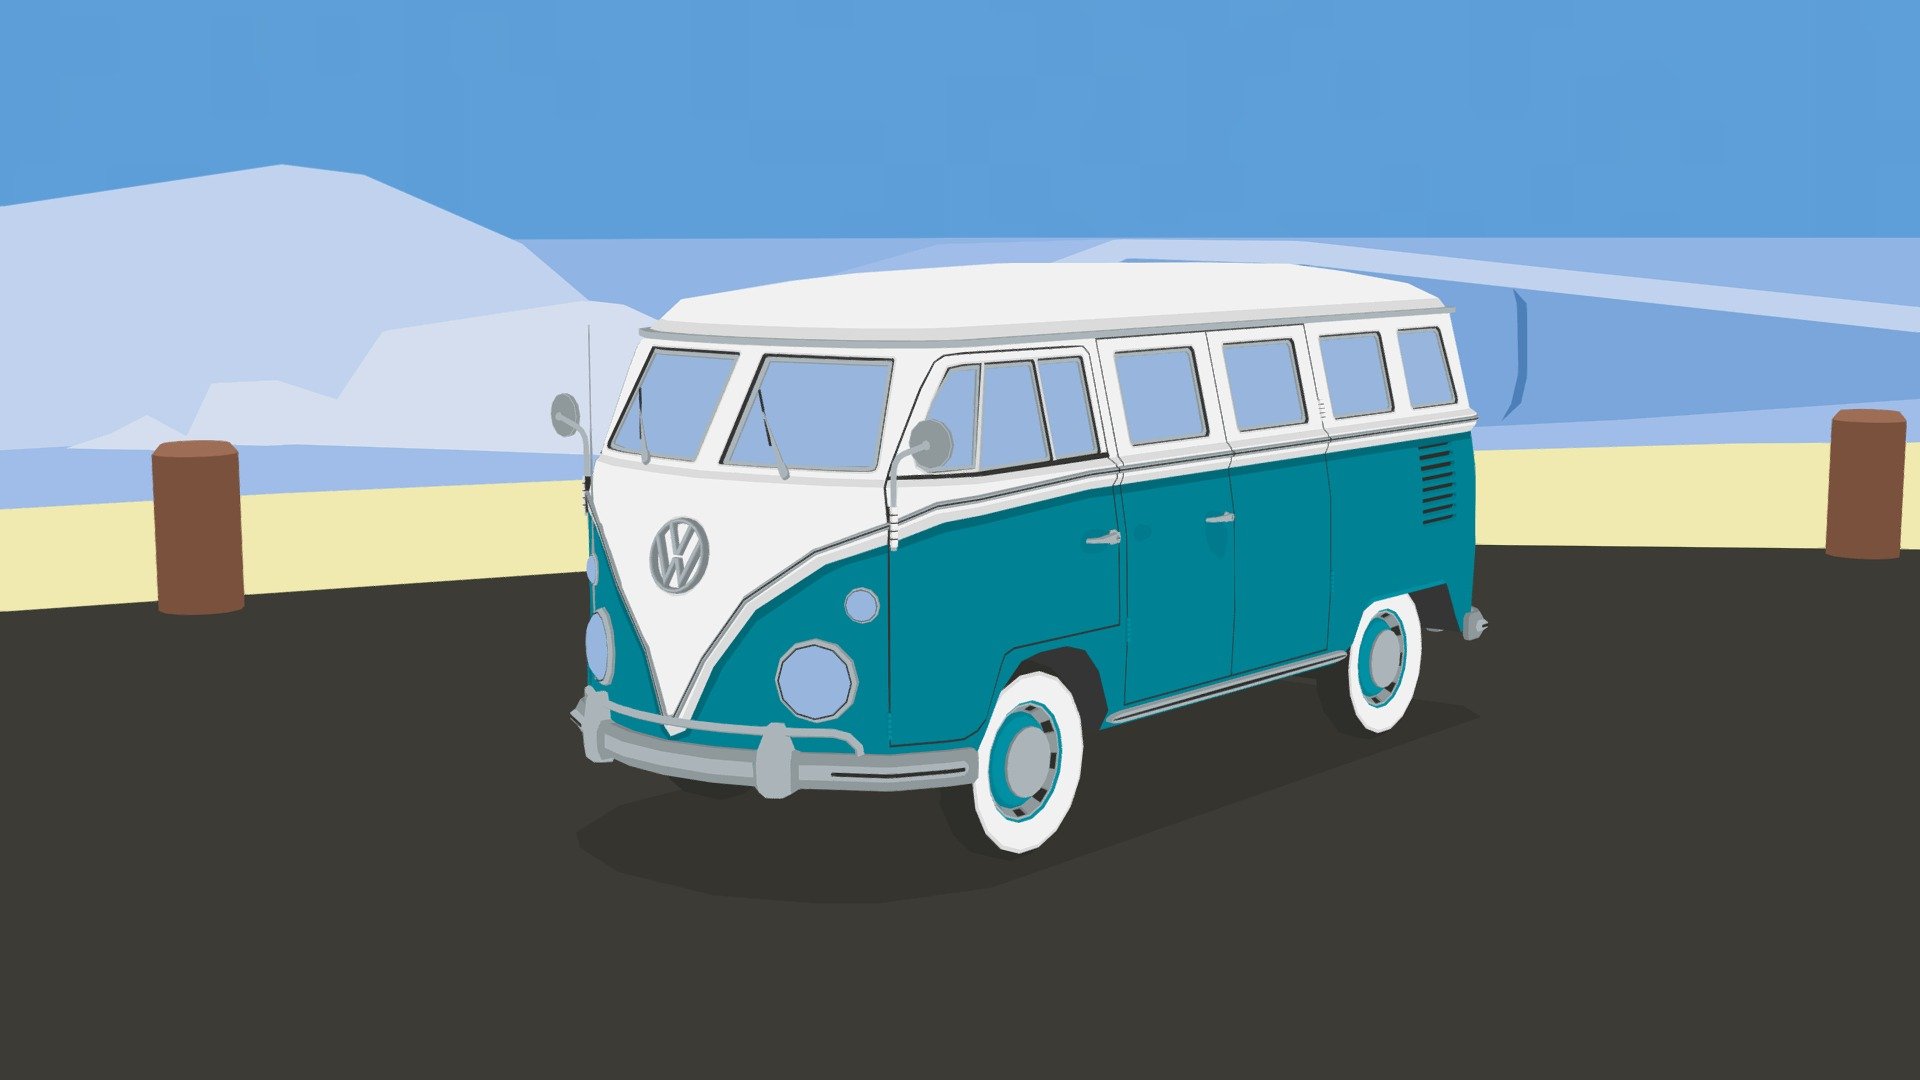 This is part seven of a series of unique automobiles I will be doing over the next few weeks. The aim is to produce one automobile each week, using reference images from a specific decade. I will create an automobile each decade from 1920 - 2020.

Hope you enjoy this Volkswagen Kombi from the 1960’s! - 1960's Automobile (Part Three) - Buy Royalty Free 3D model by tzeshi (@timvizesi) 3d model